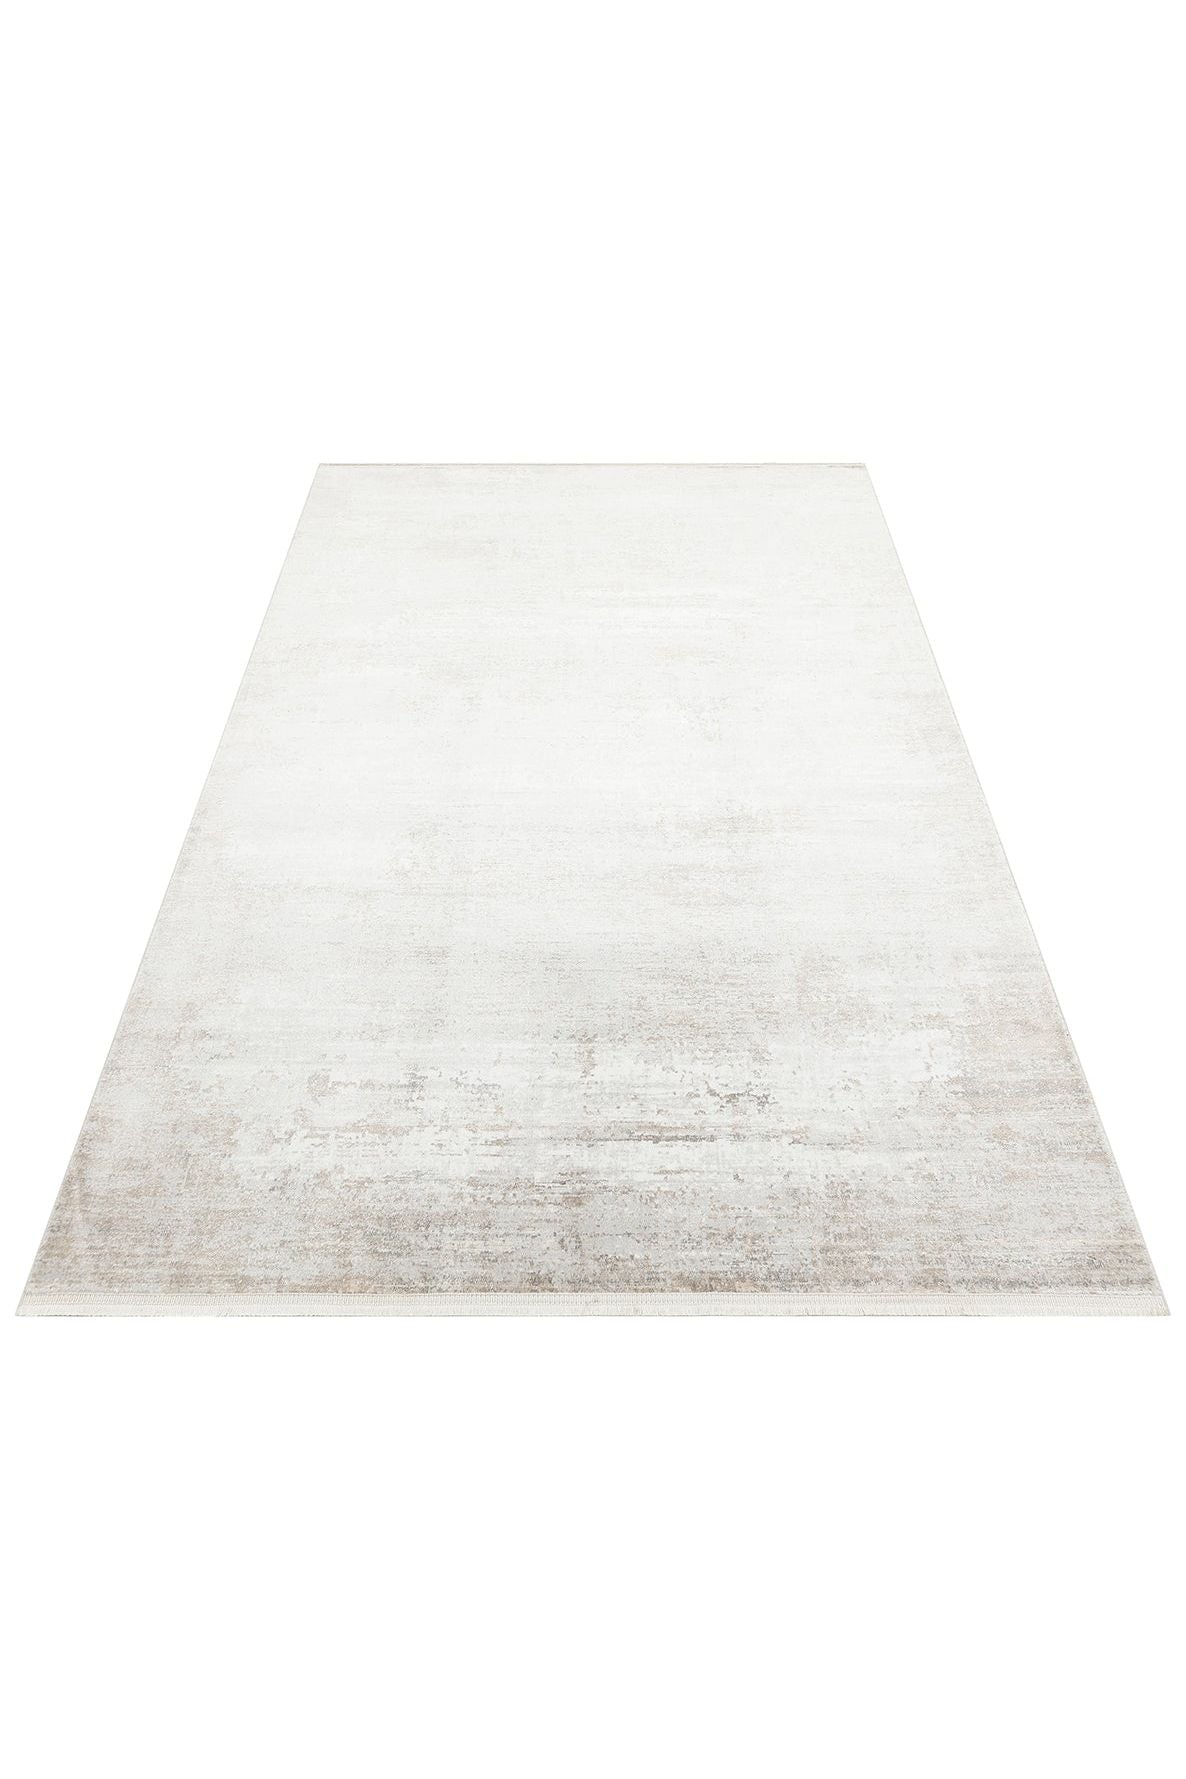 #Turkish_Carpets_Rugs# #Modern_Carpets# #Abrash_Carpets#Elegant Rugs With Acrylic And PolyesterZrh 05 Cream Grey